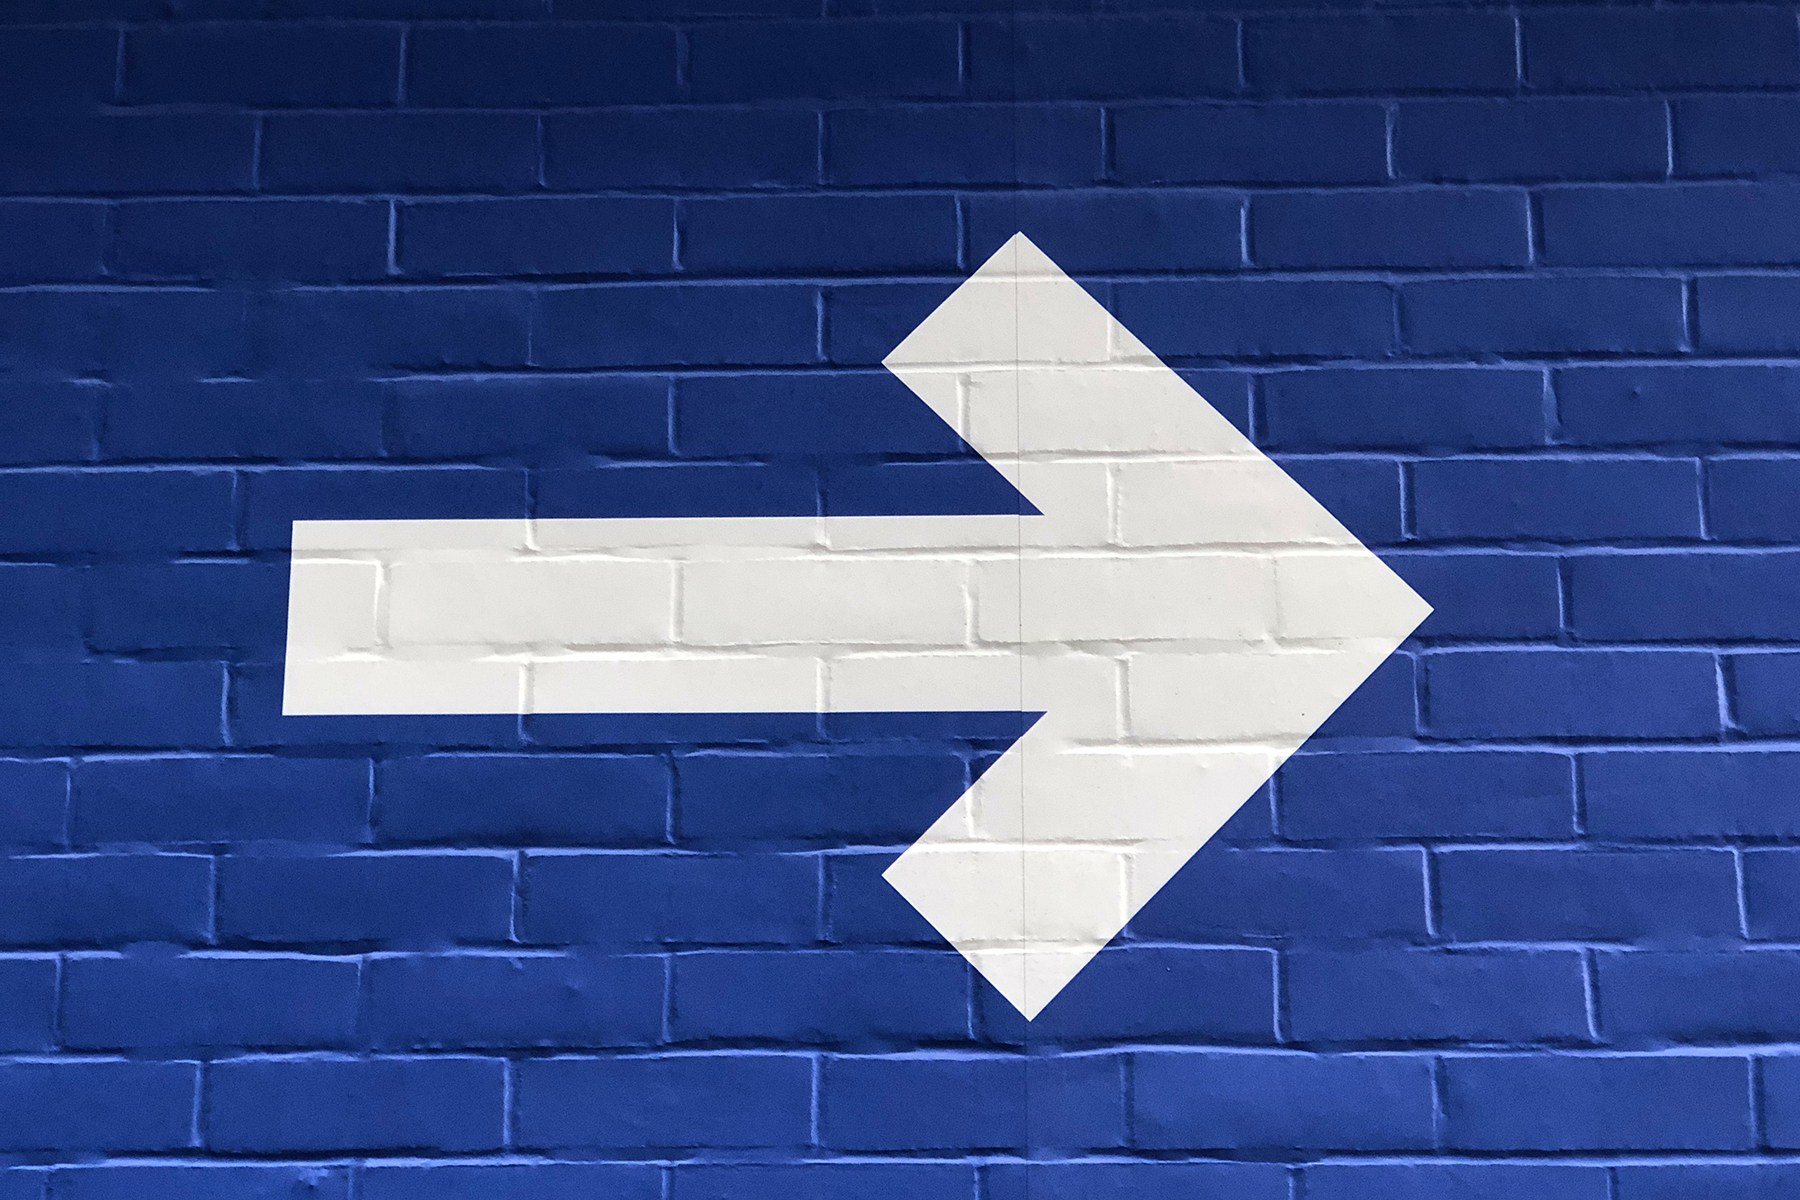 white arrow pointing right on a blue background